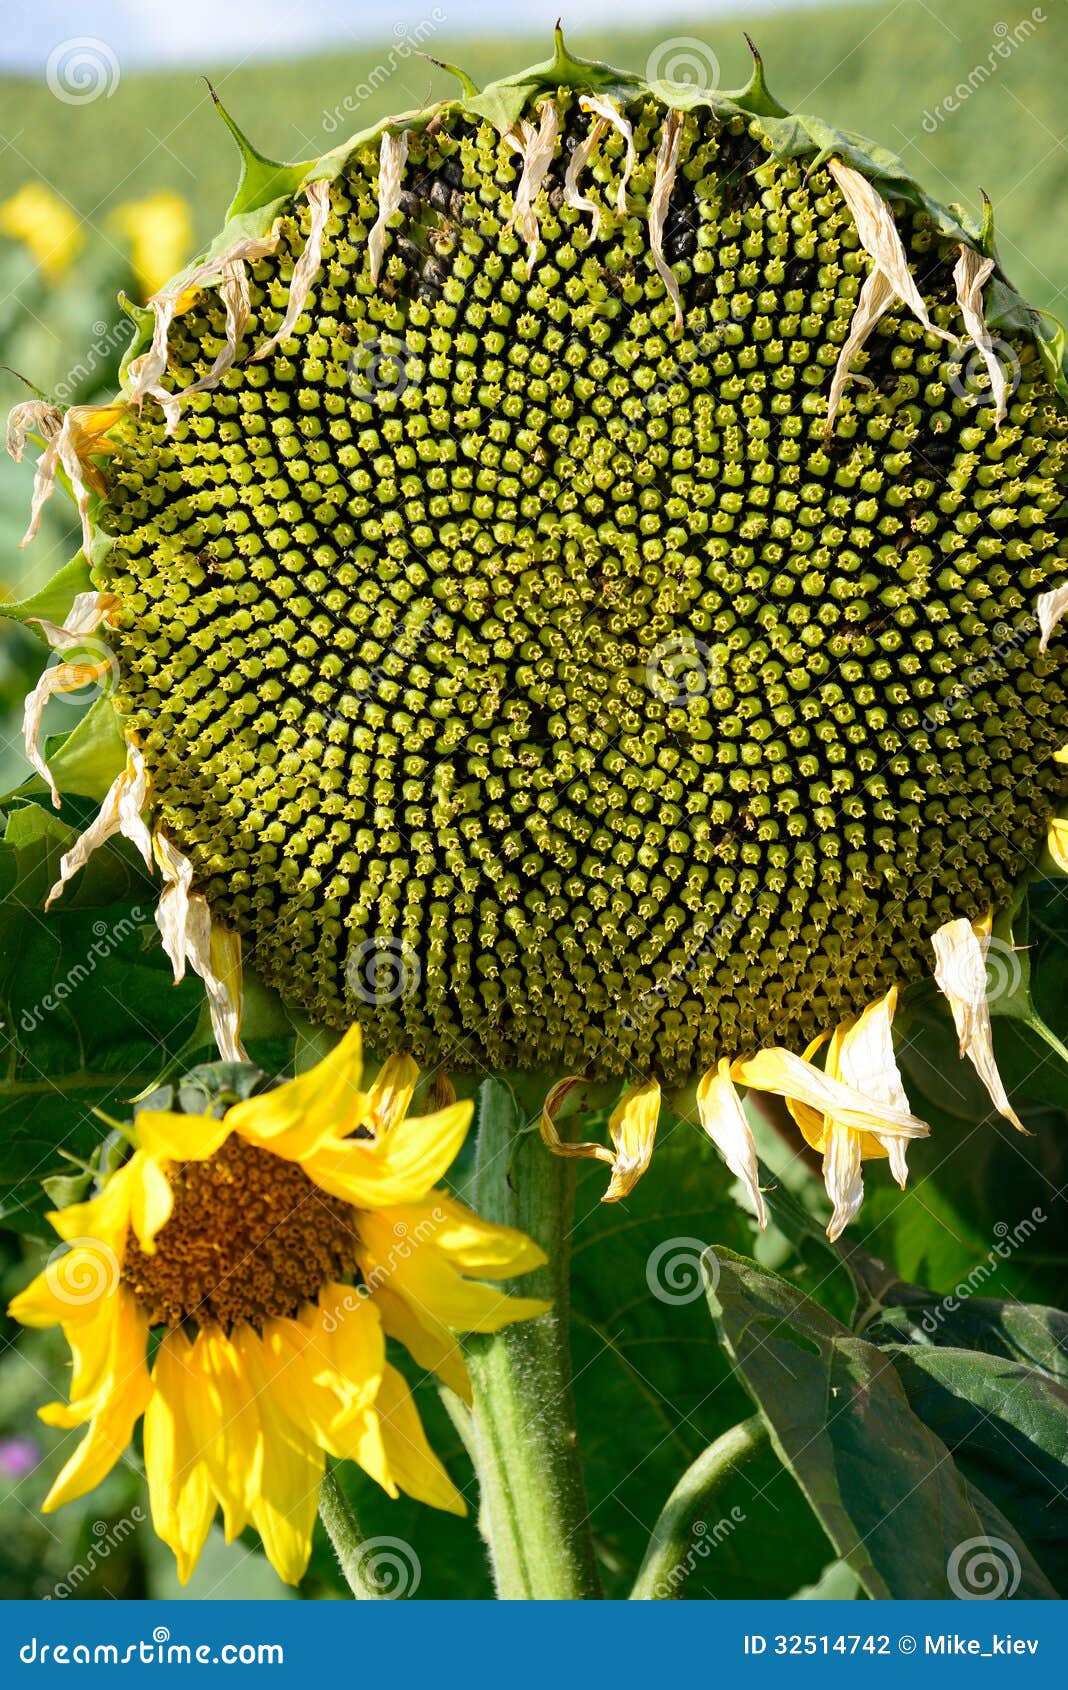 Sunflower seeds stock photo. Image of green, landscape - 32514742